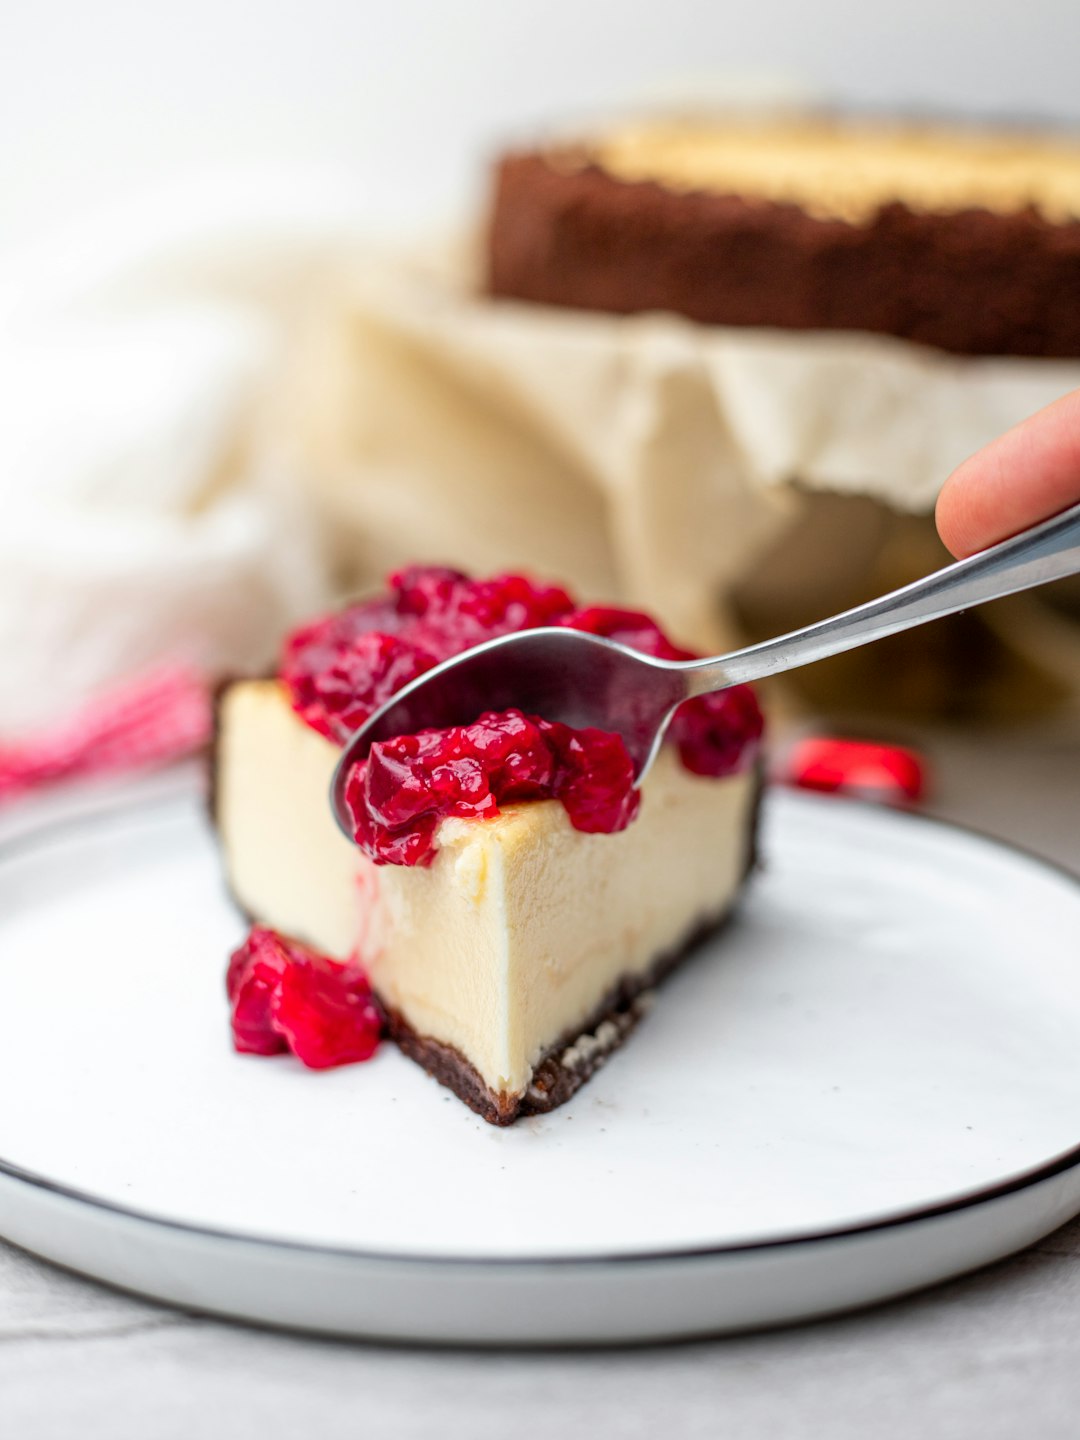 Time to indulge - New York cheesecake with a little twist. Chocolate cookie crust instead of a traditional vanilla and some sour cherry topping. 